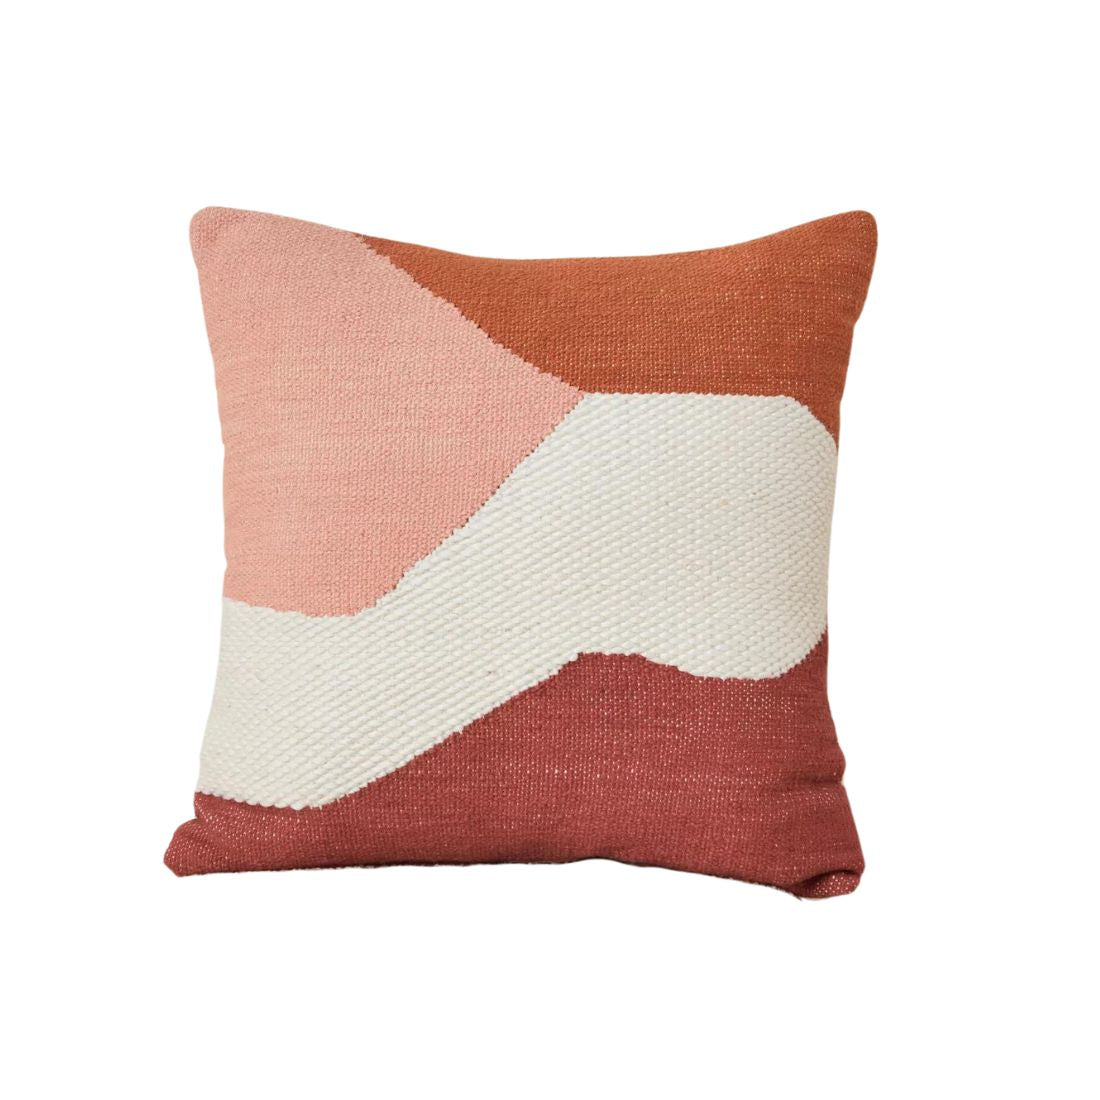 Rust Multicolored Embroidered Cushion